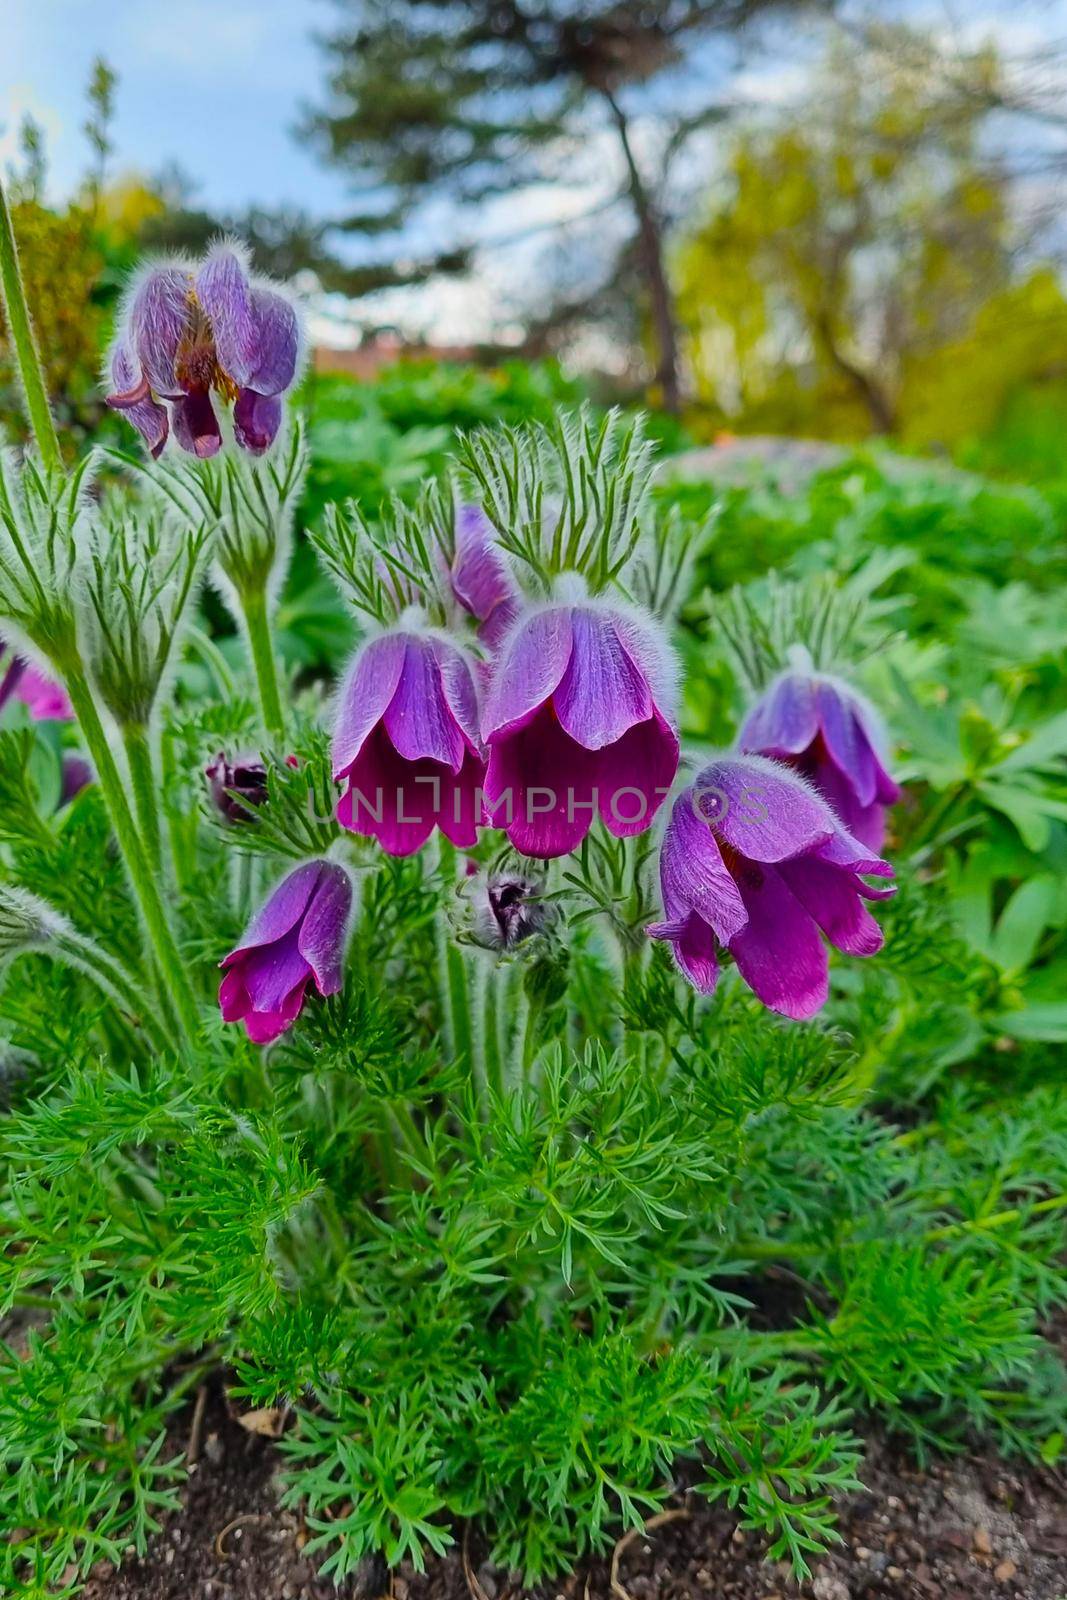 Pulsatilla patens is a species of flowering plant in the family Ranunculaceae. by kip02kas